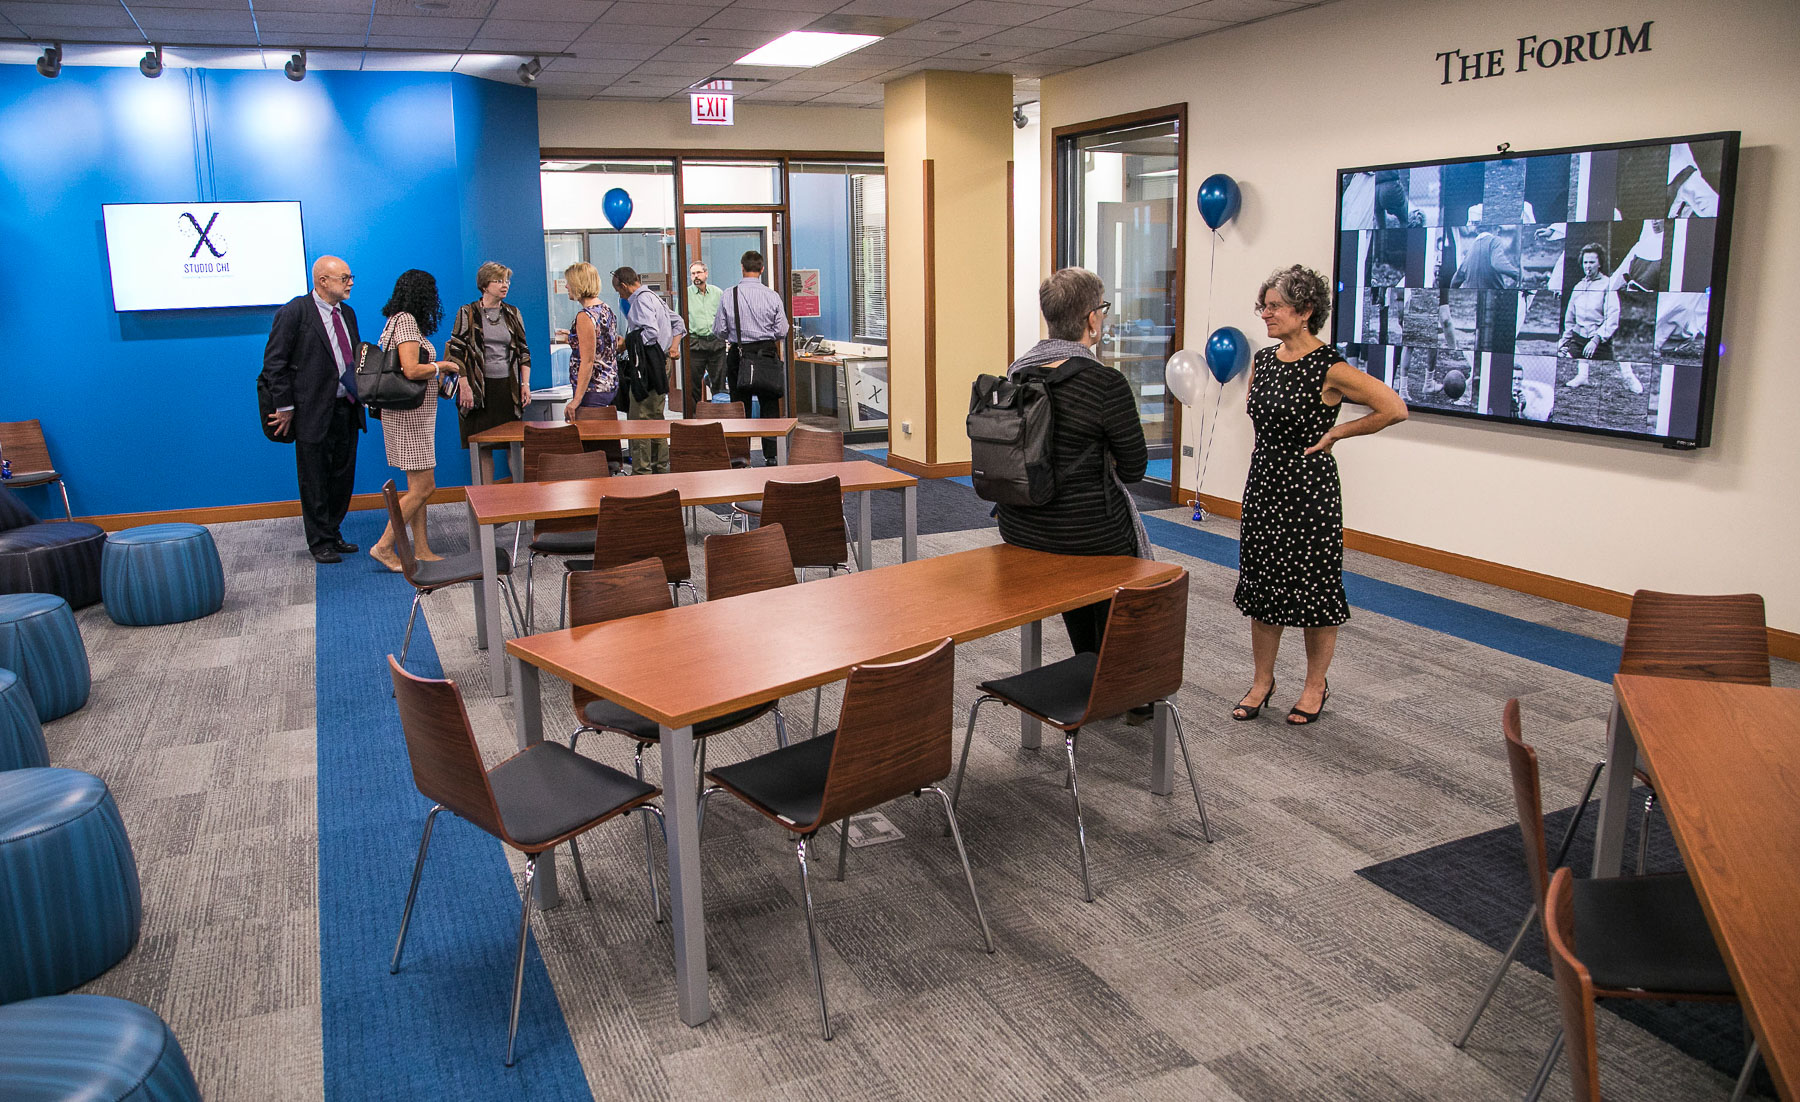 The second floor of the Richardson Library now features a 3D scanning and printing "Maker Hub" area, audio and video recording/editing rooms in the new 1581 Media Studios, several high-tech classroom spaces, and the new home for Studio CHI. (DePaul University/Jamie Moncrief)